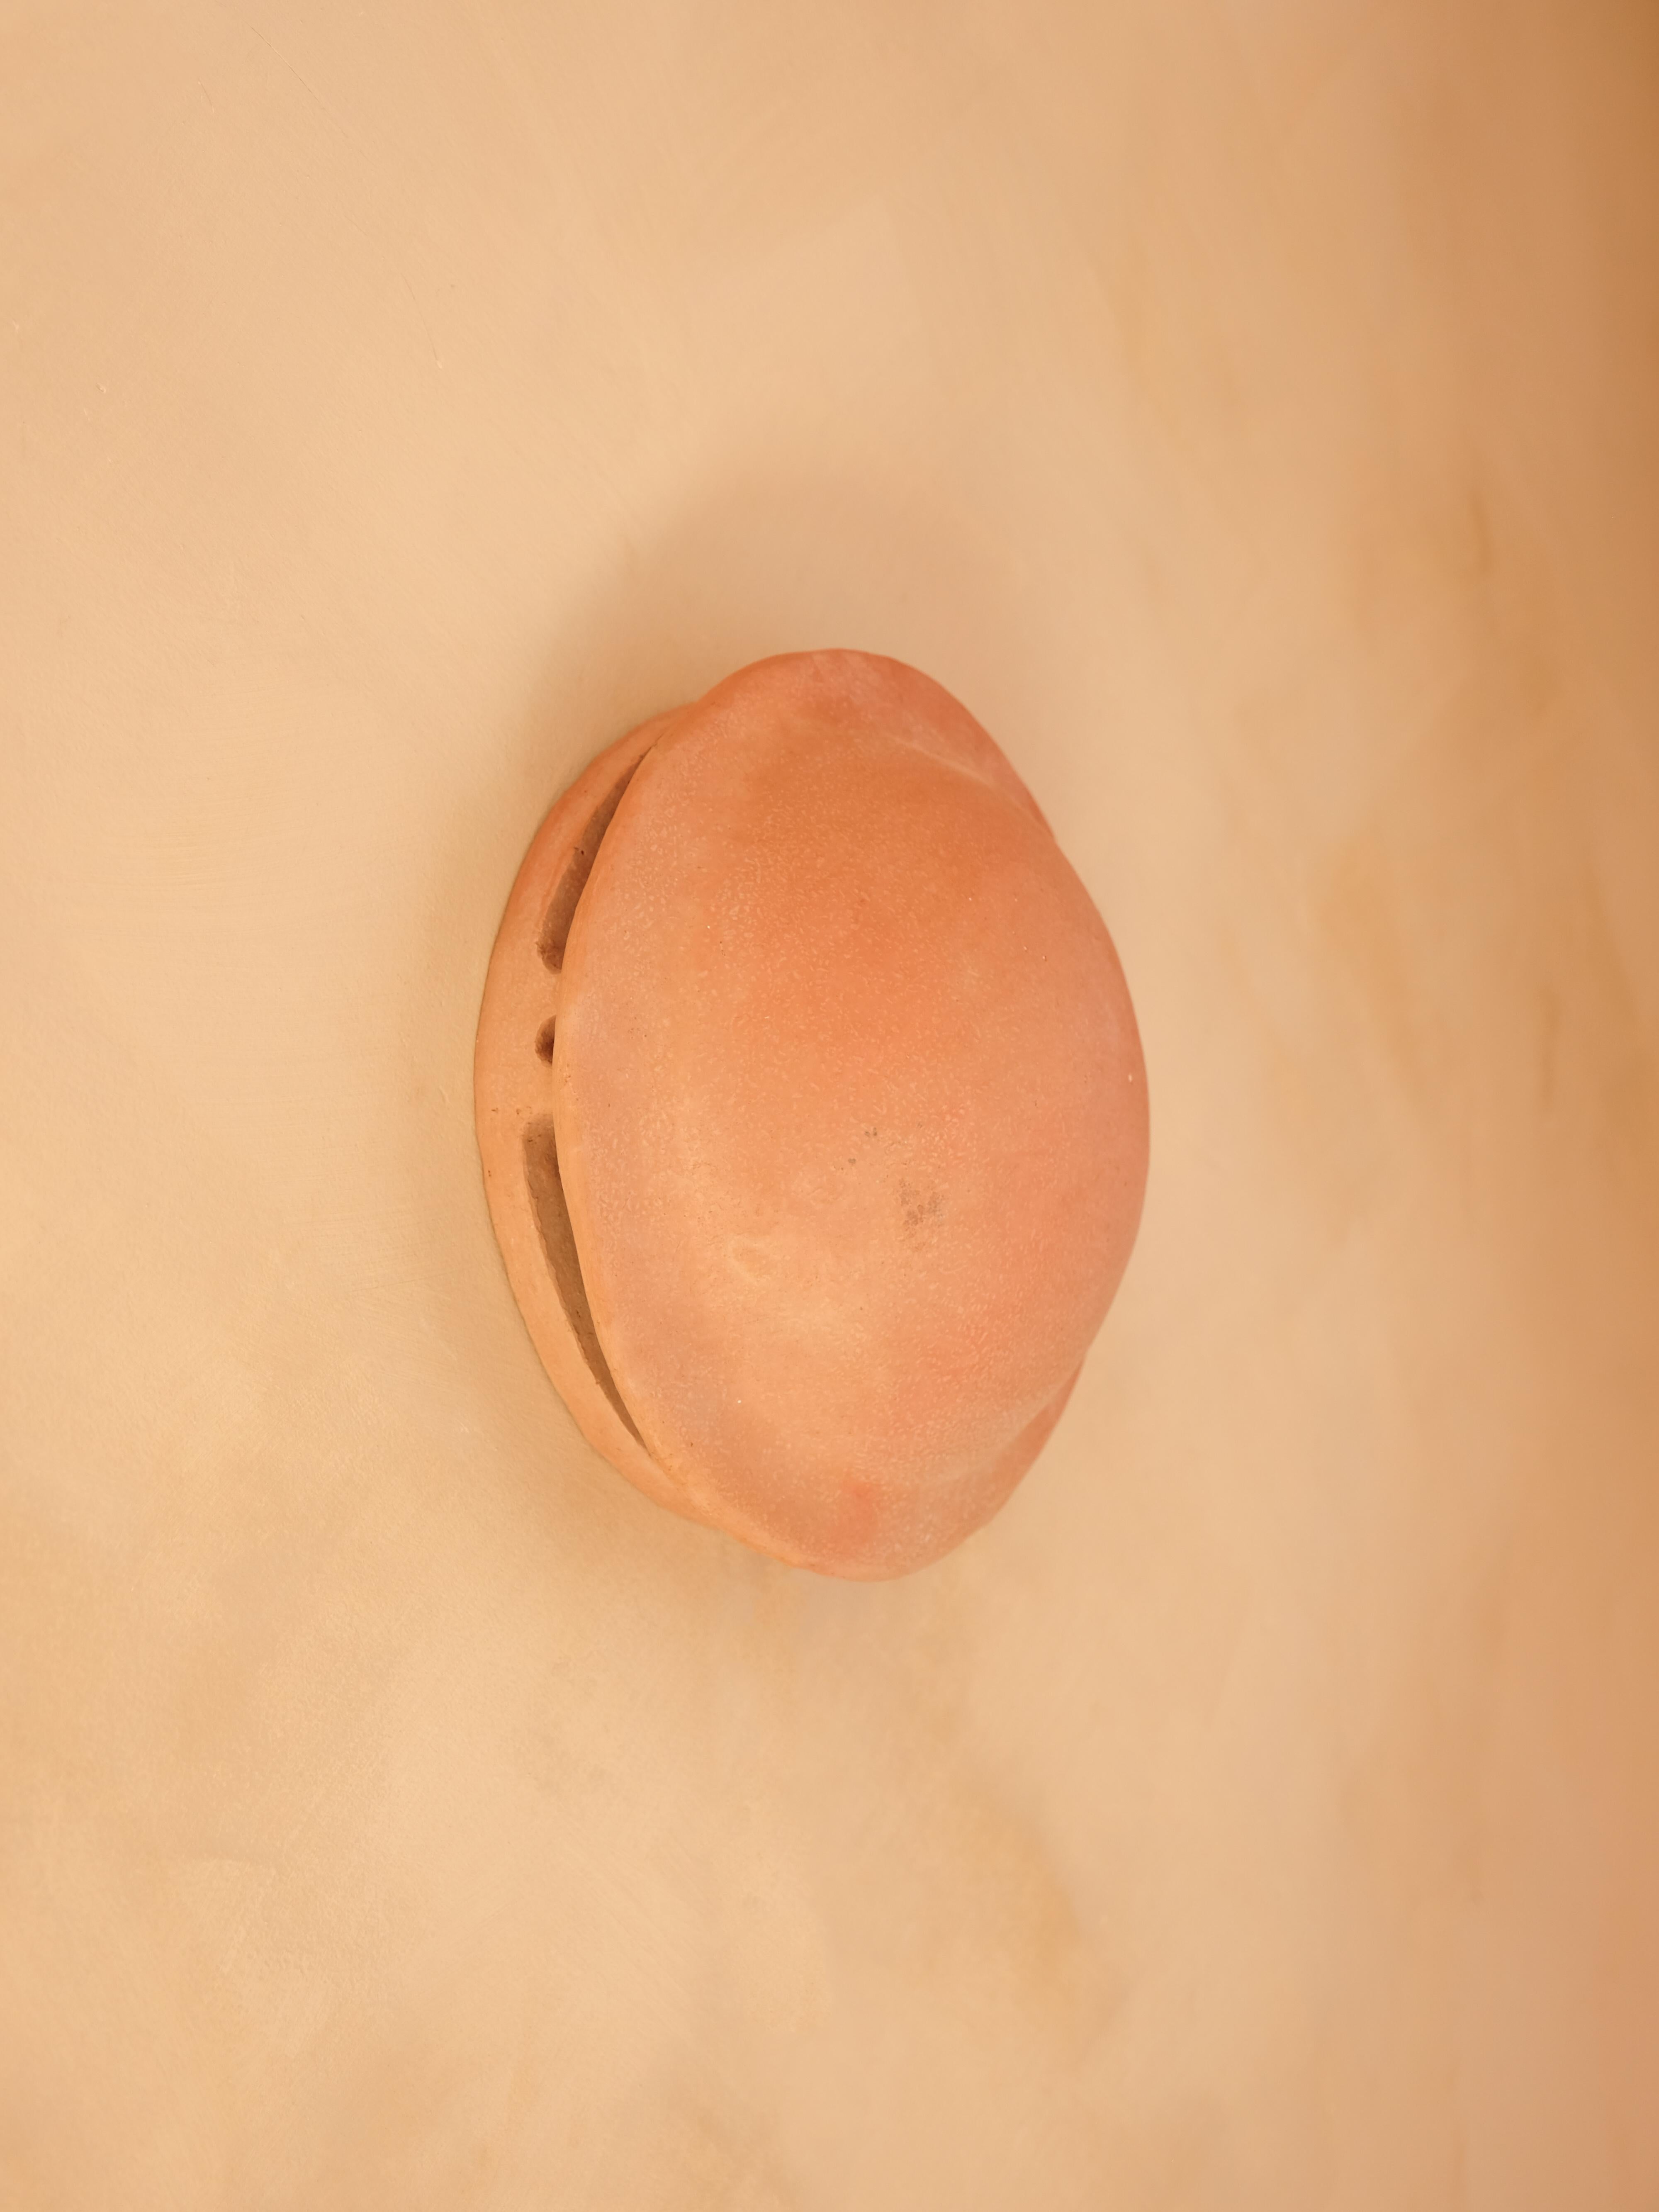 - Handbuilt terracotta ceramic wall light
- made of clay collected from the potter's surroundings.
- made in the Moroccan Rif mountains by the potter Houda.
- co-created by the potter Houda x memòri team
- small scale-production
- an extra fixing is